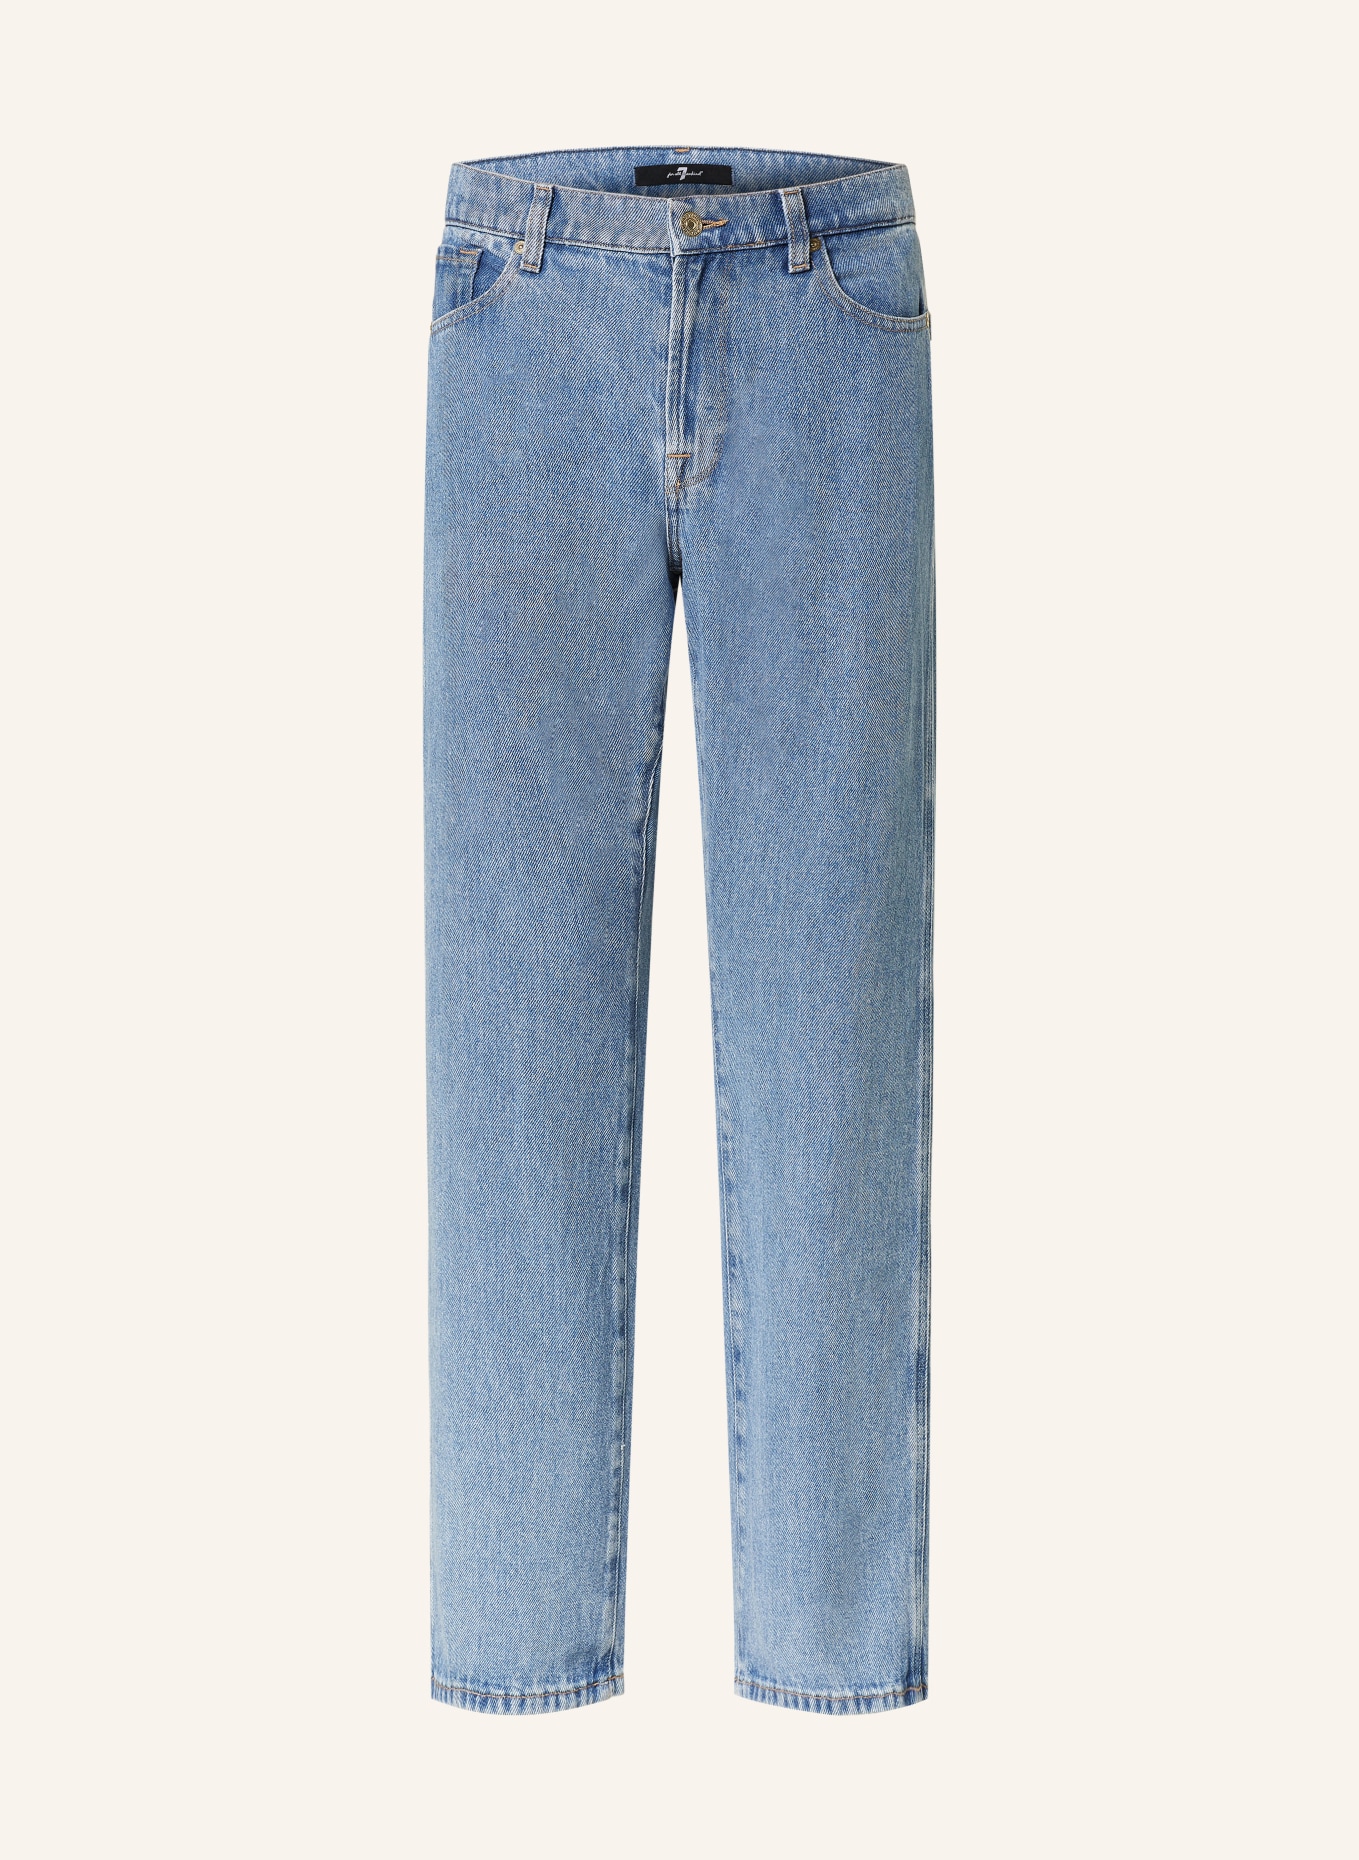 7 for all mankind Straight Jeans TESS, Farbe: LIGHT BLUE (Bild 1)